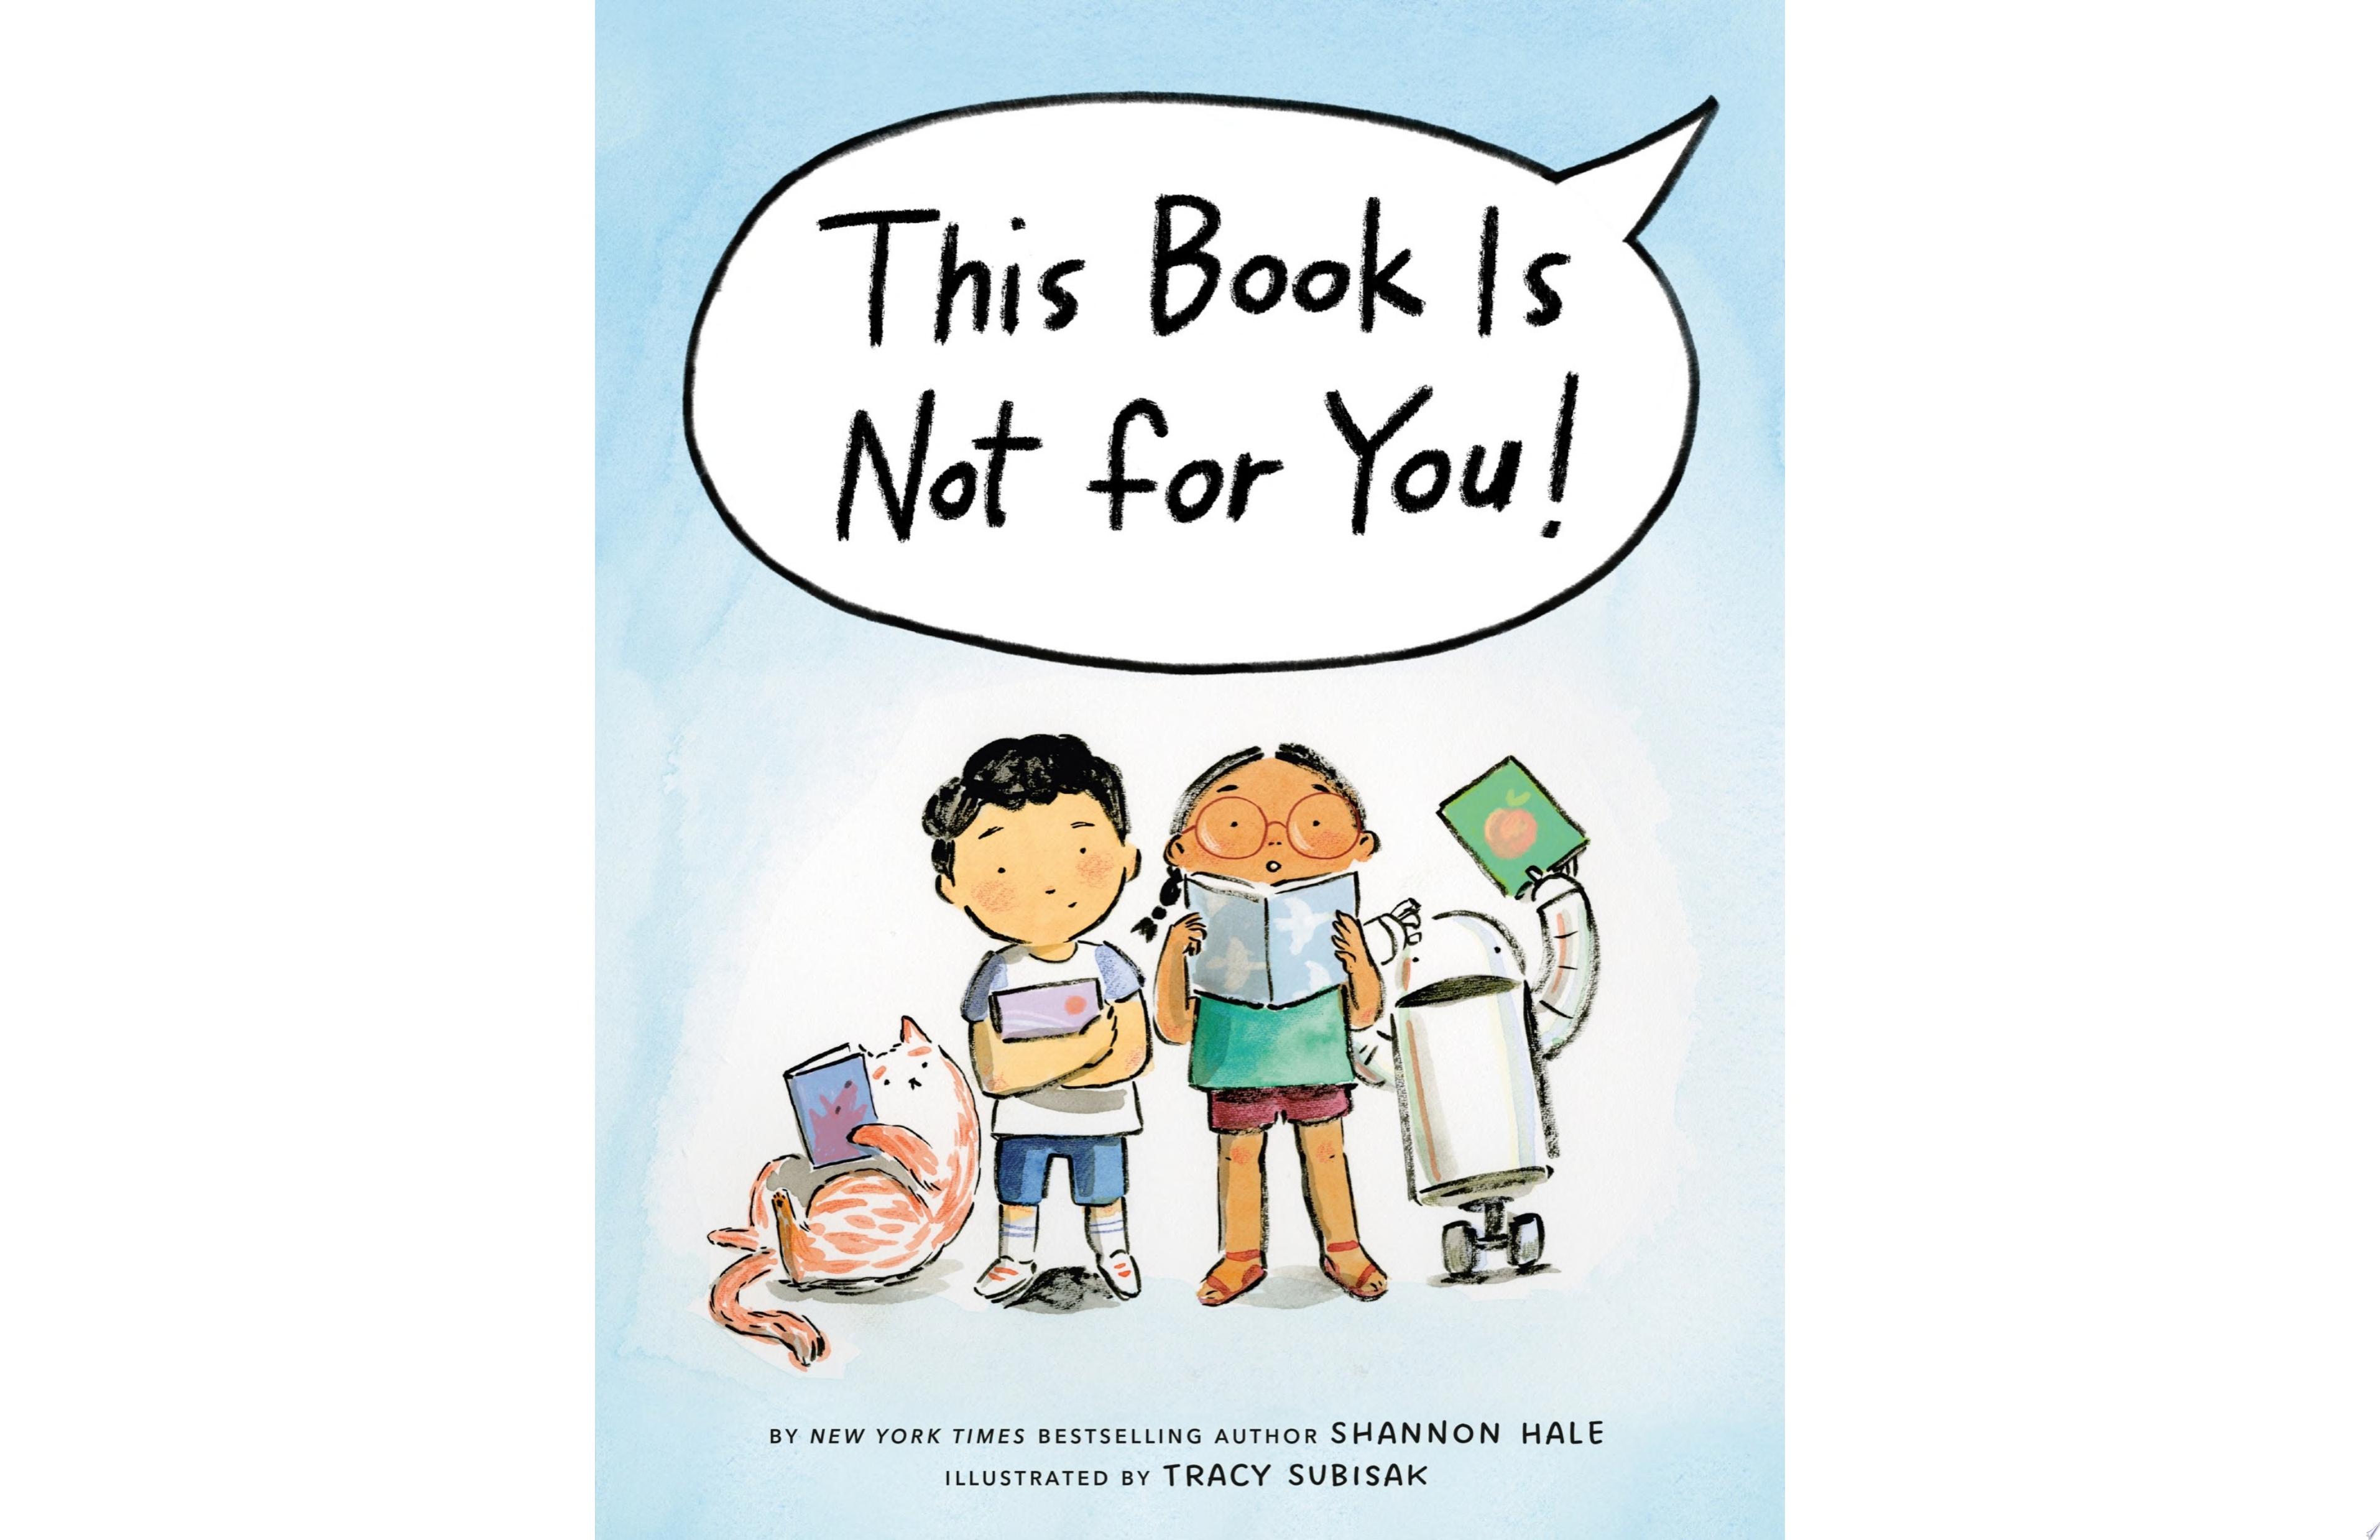 Image for "This Book Is Not for You!"